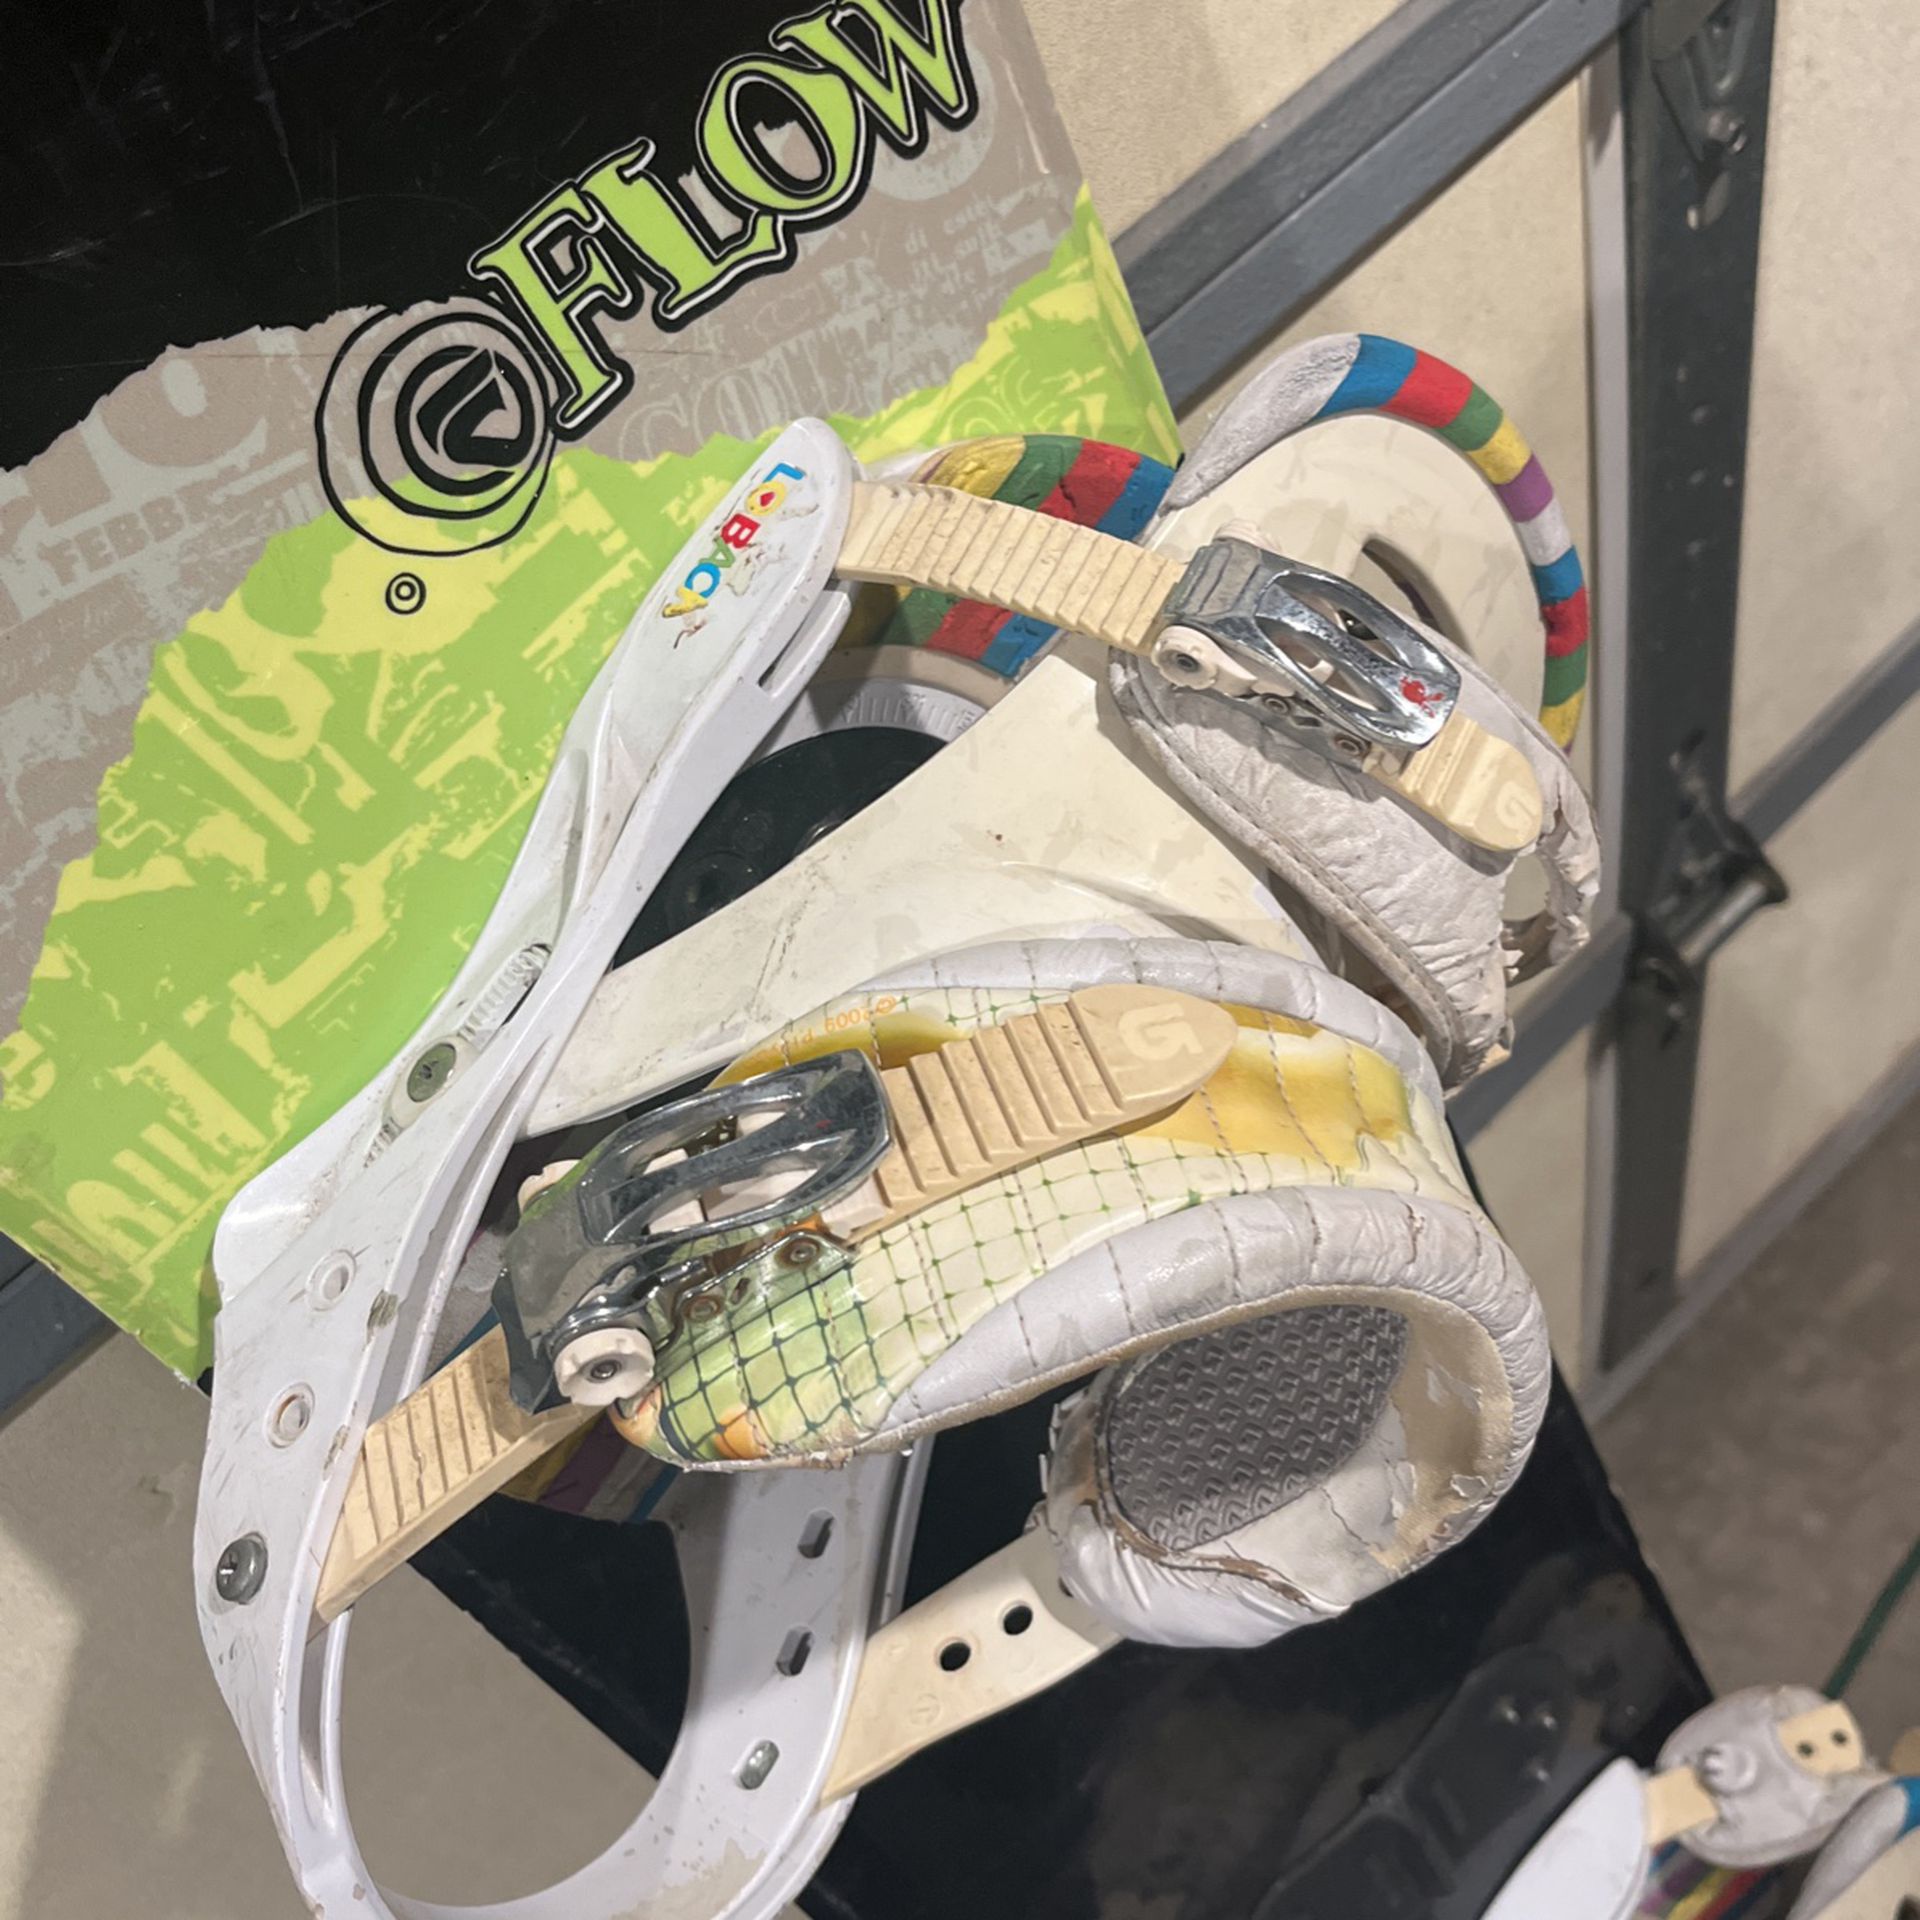 155W Snowboard for Sale in Spring Valley, CA - OfferUp